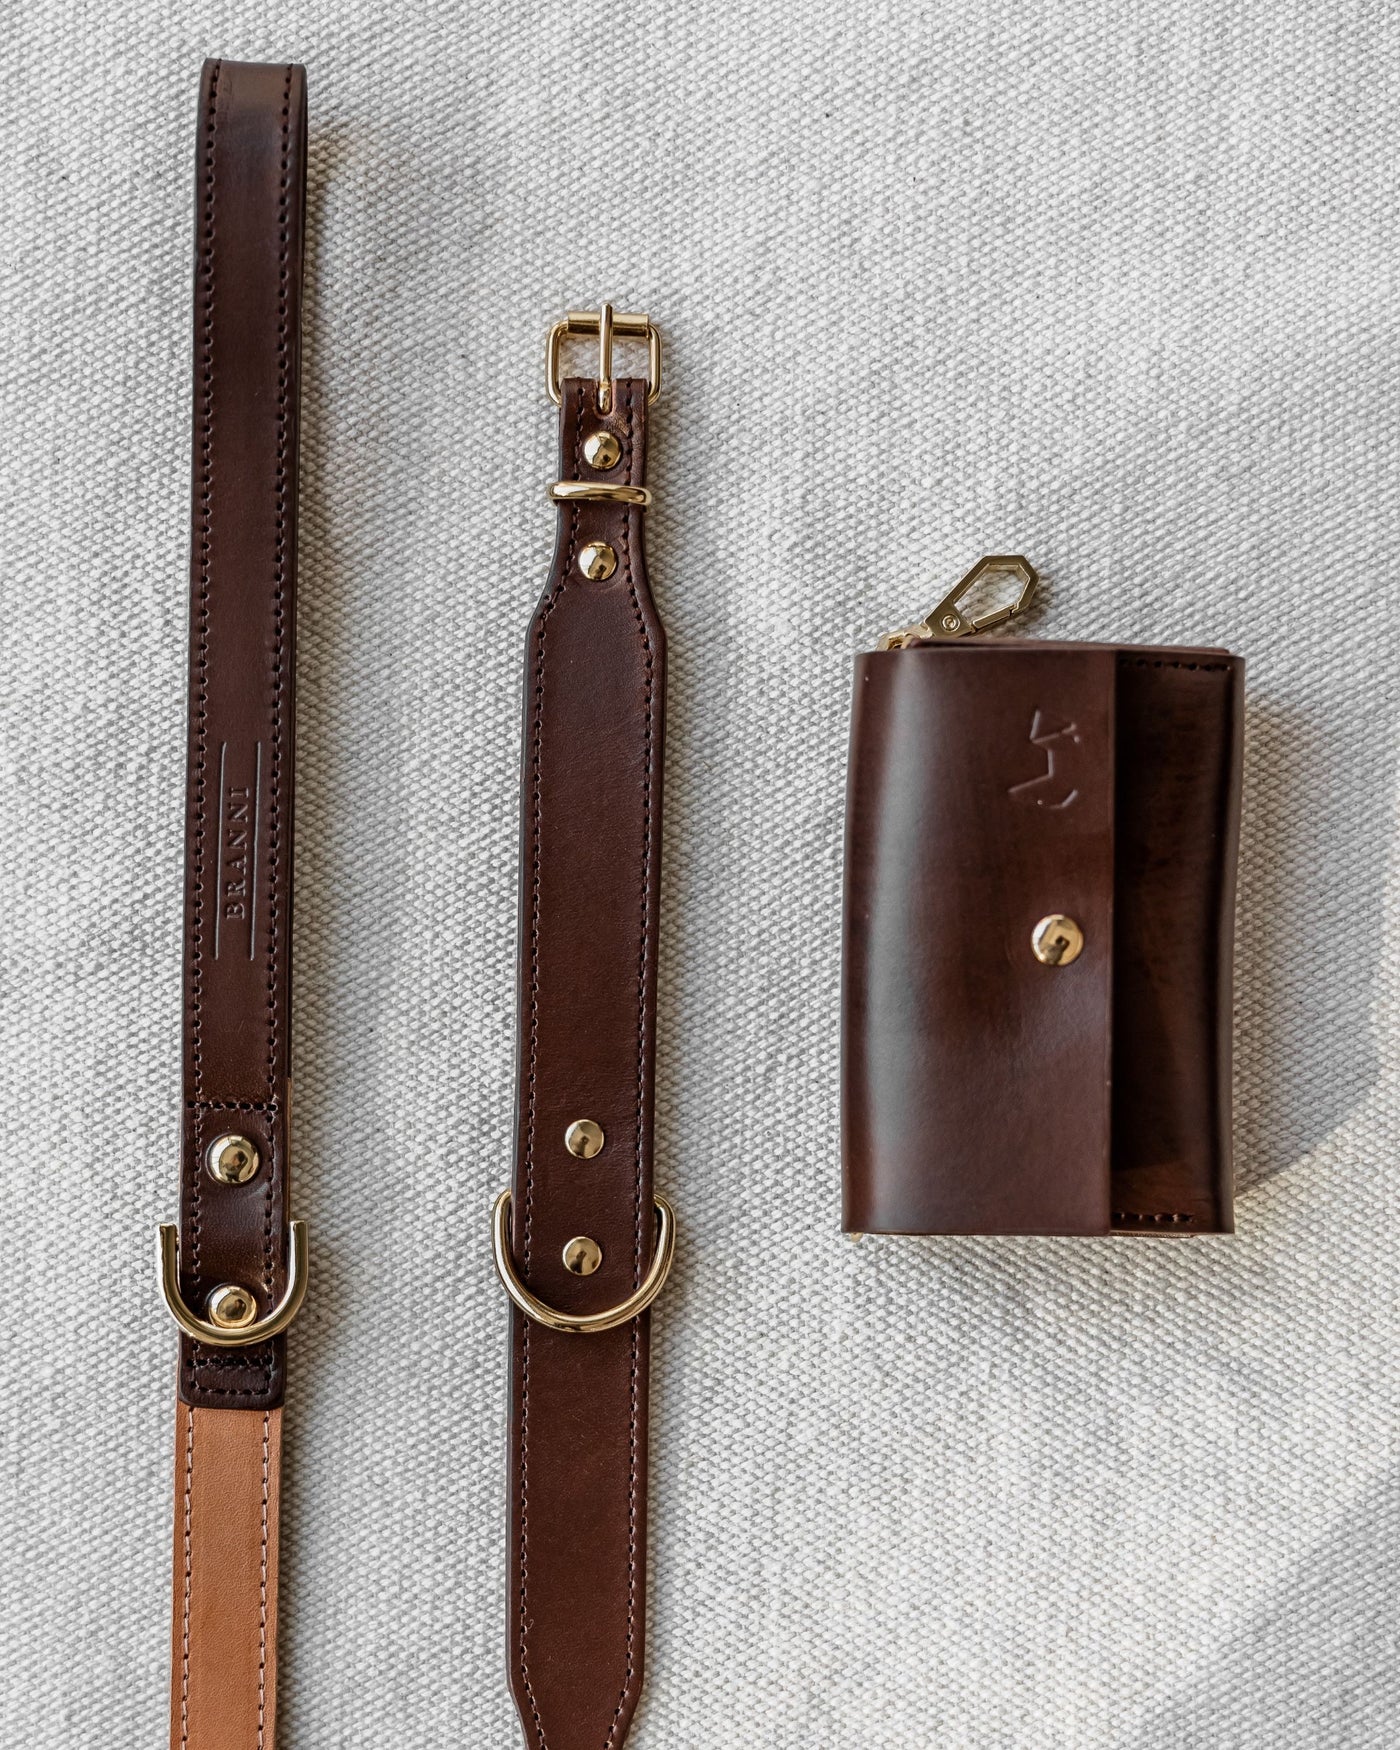 Rocco Leash in Tan and Brown Leather Product Image Detail